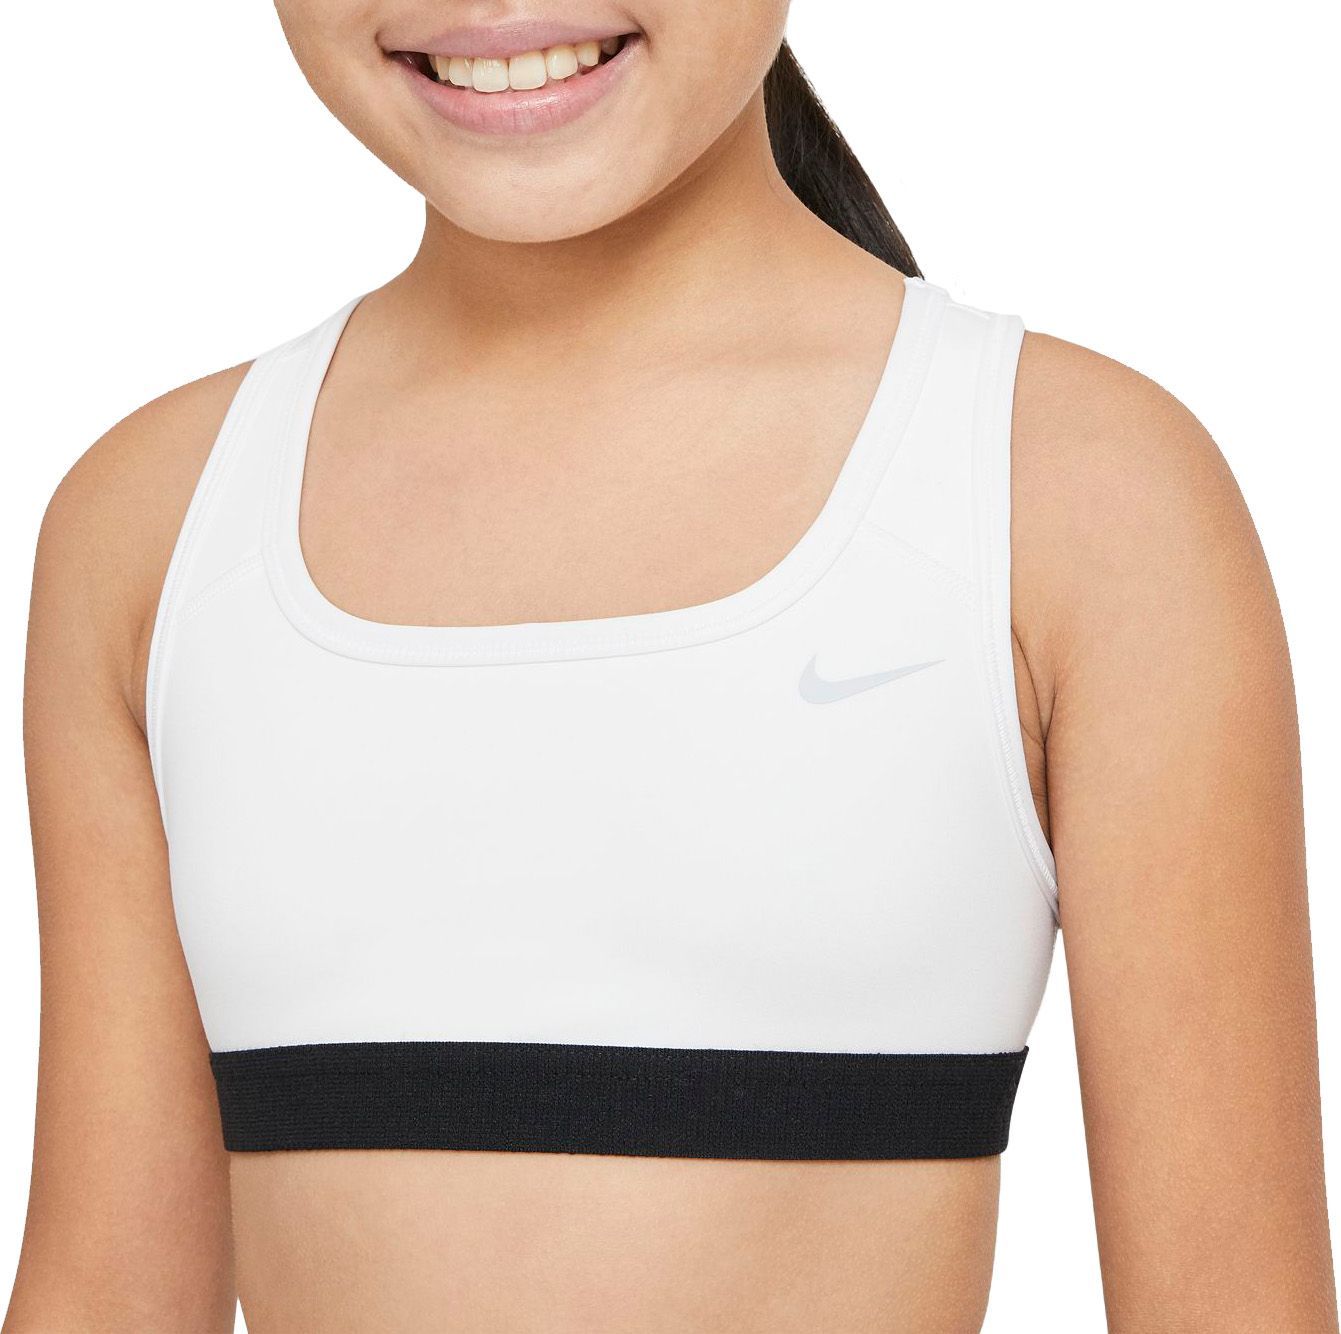 YUMILY Age 8-12 Tween Girls First Training Bra Ribbed Knit Bralette Non Pads Cotton Crop Tops